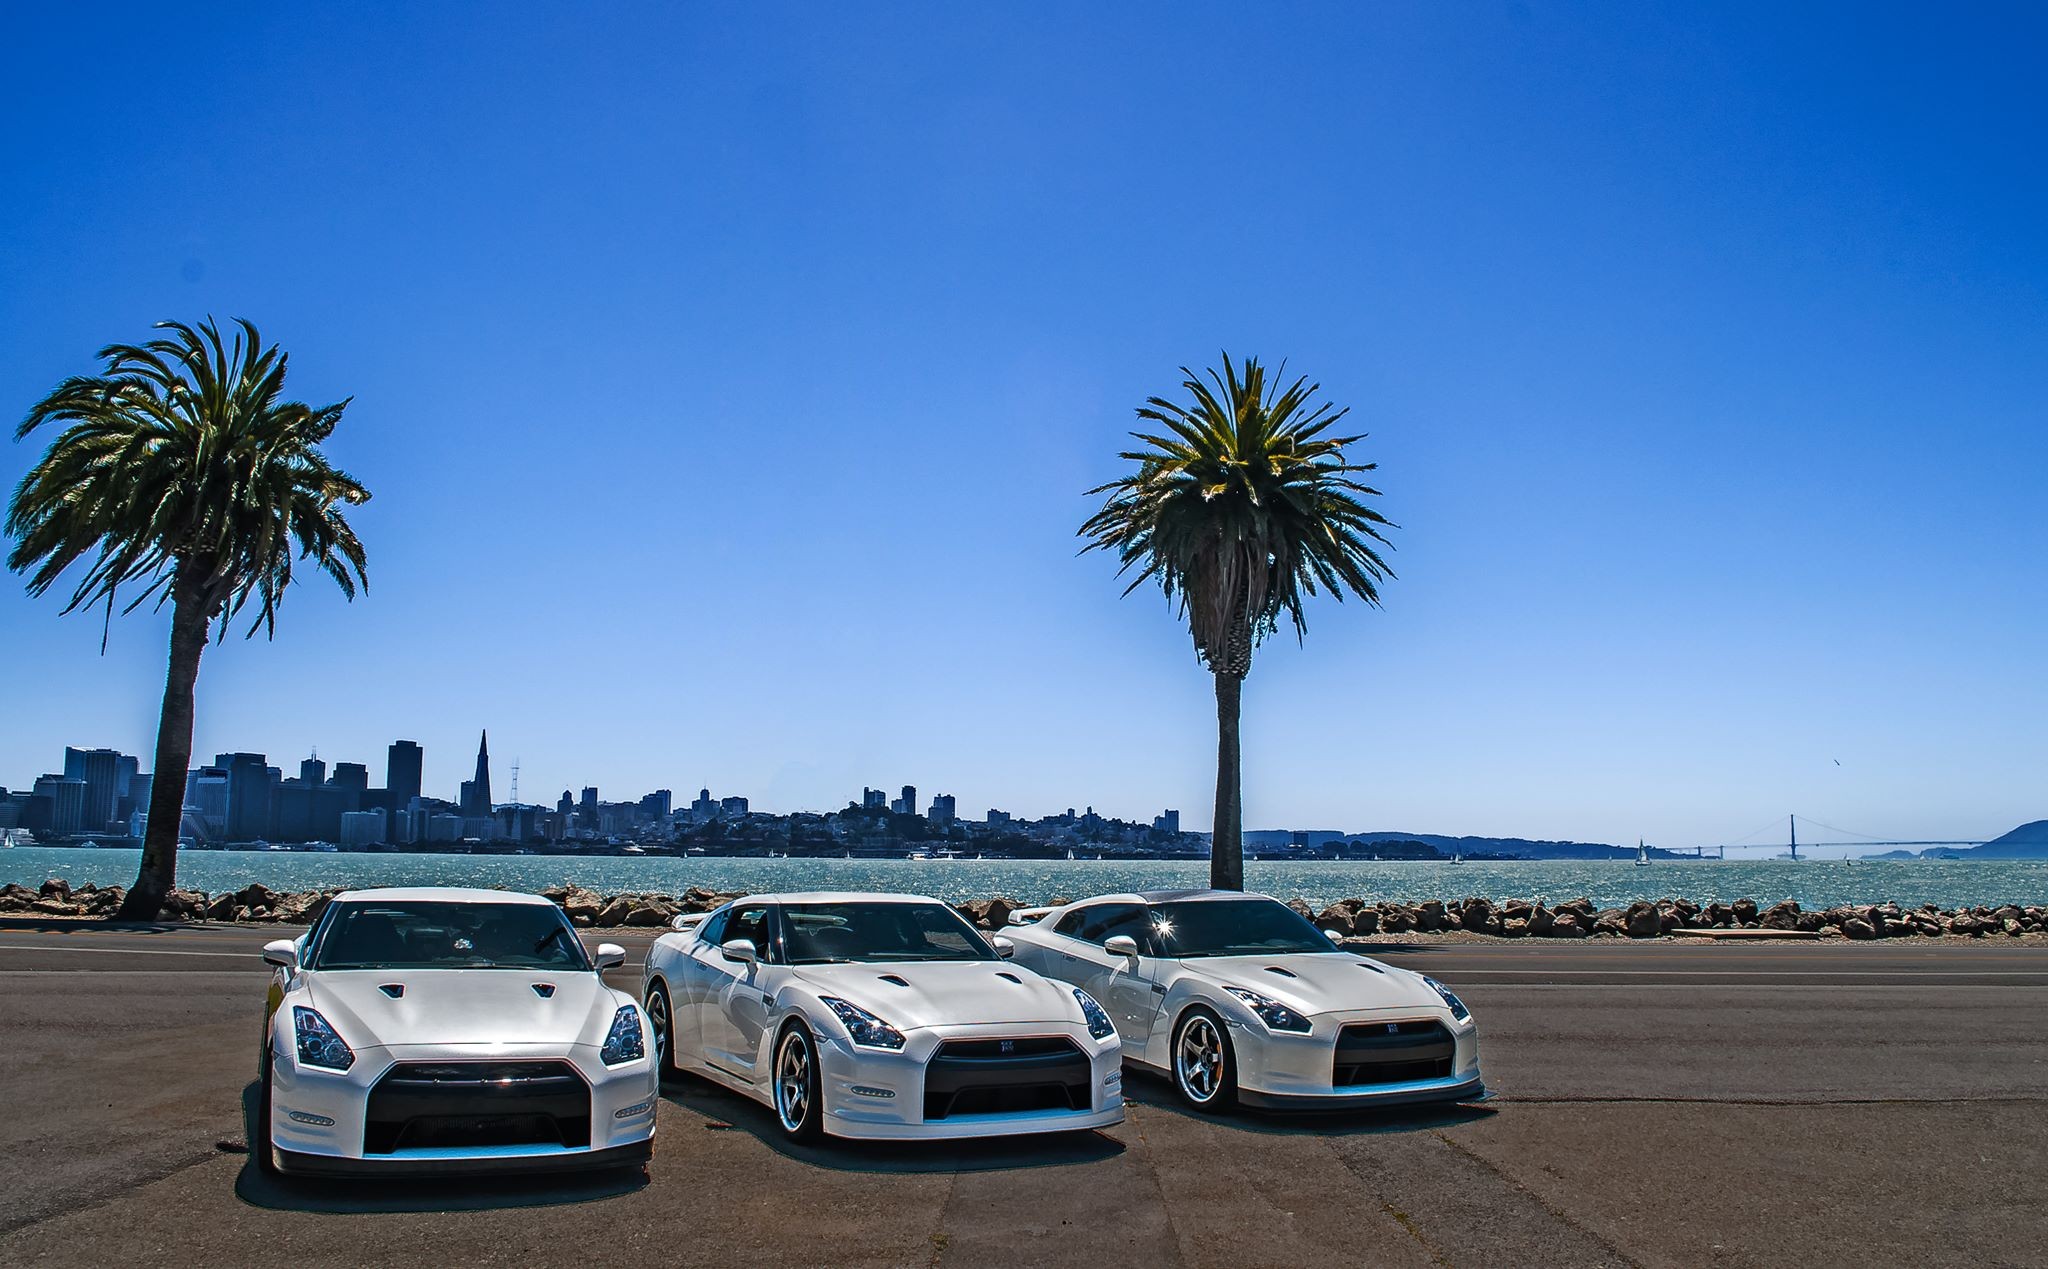 General 2048x1269 Nissan GT-R car vehicle white cars palm trees sky Nissan Japanese cars